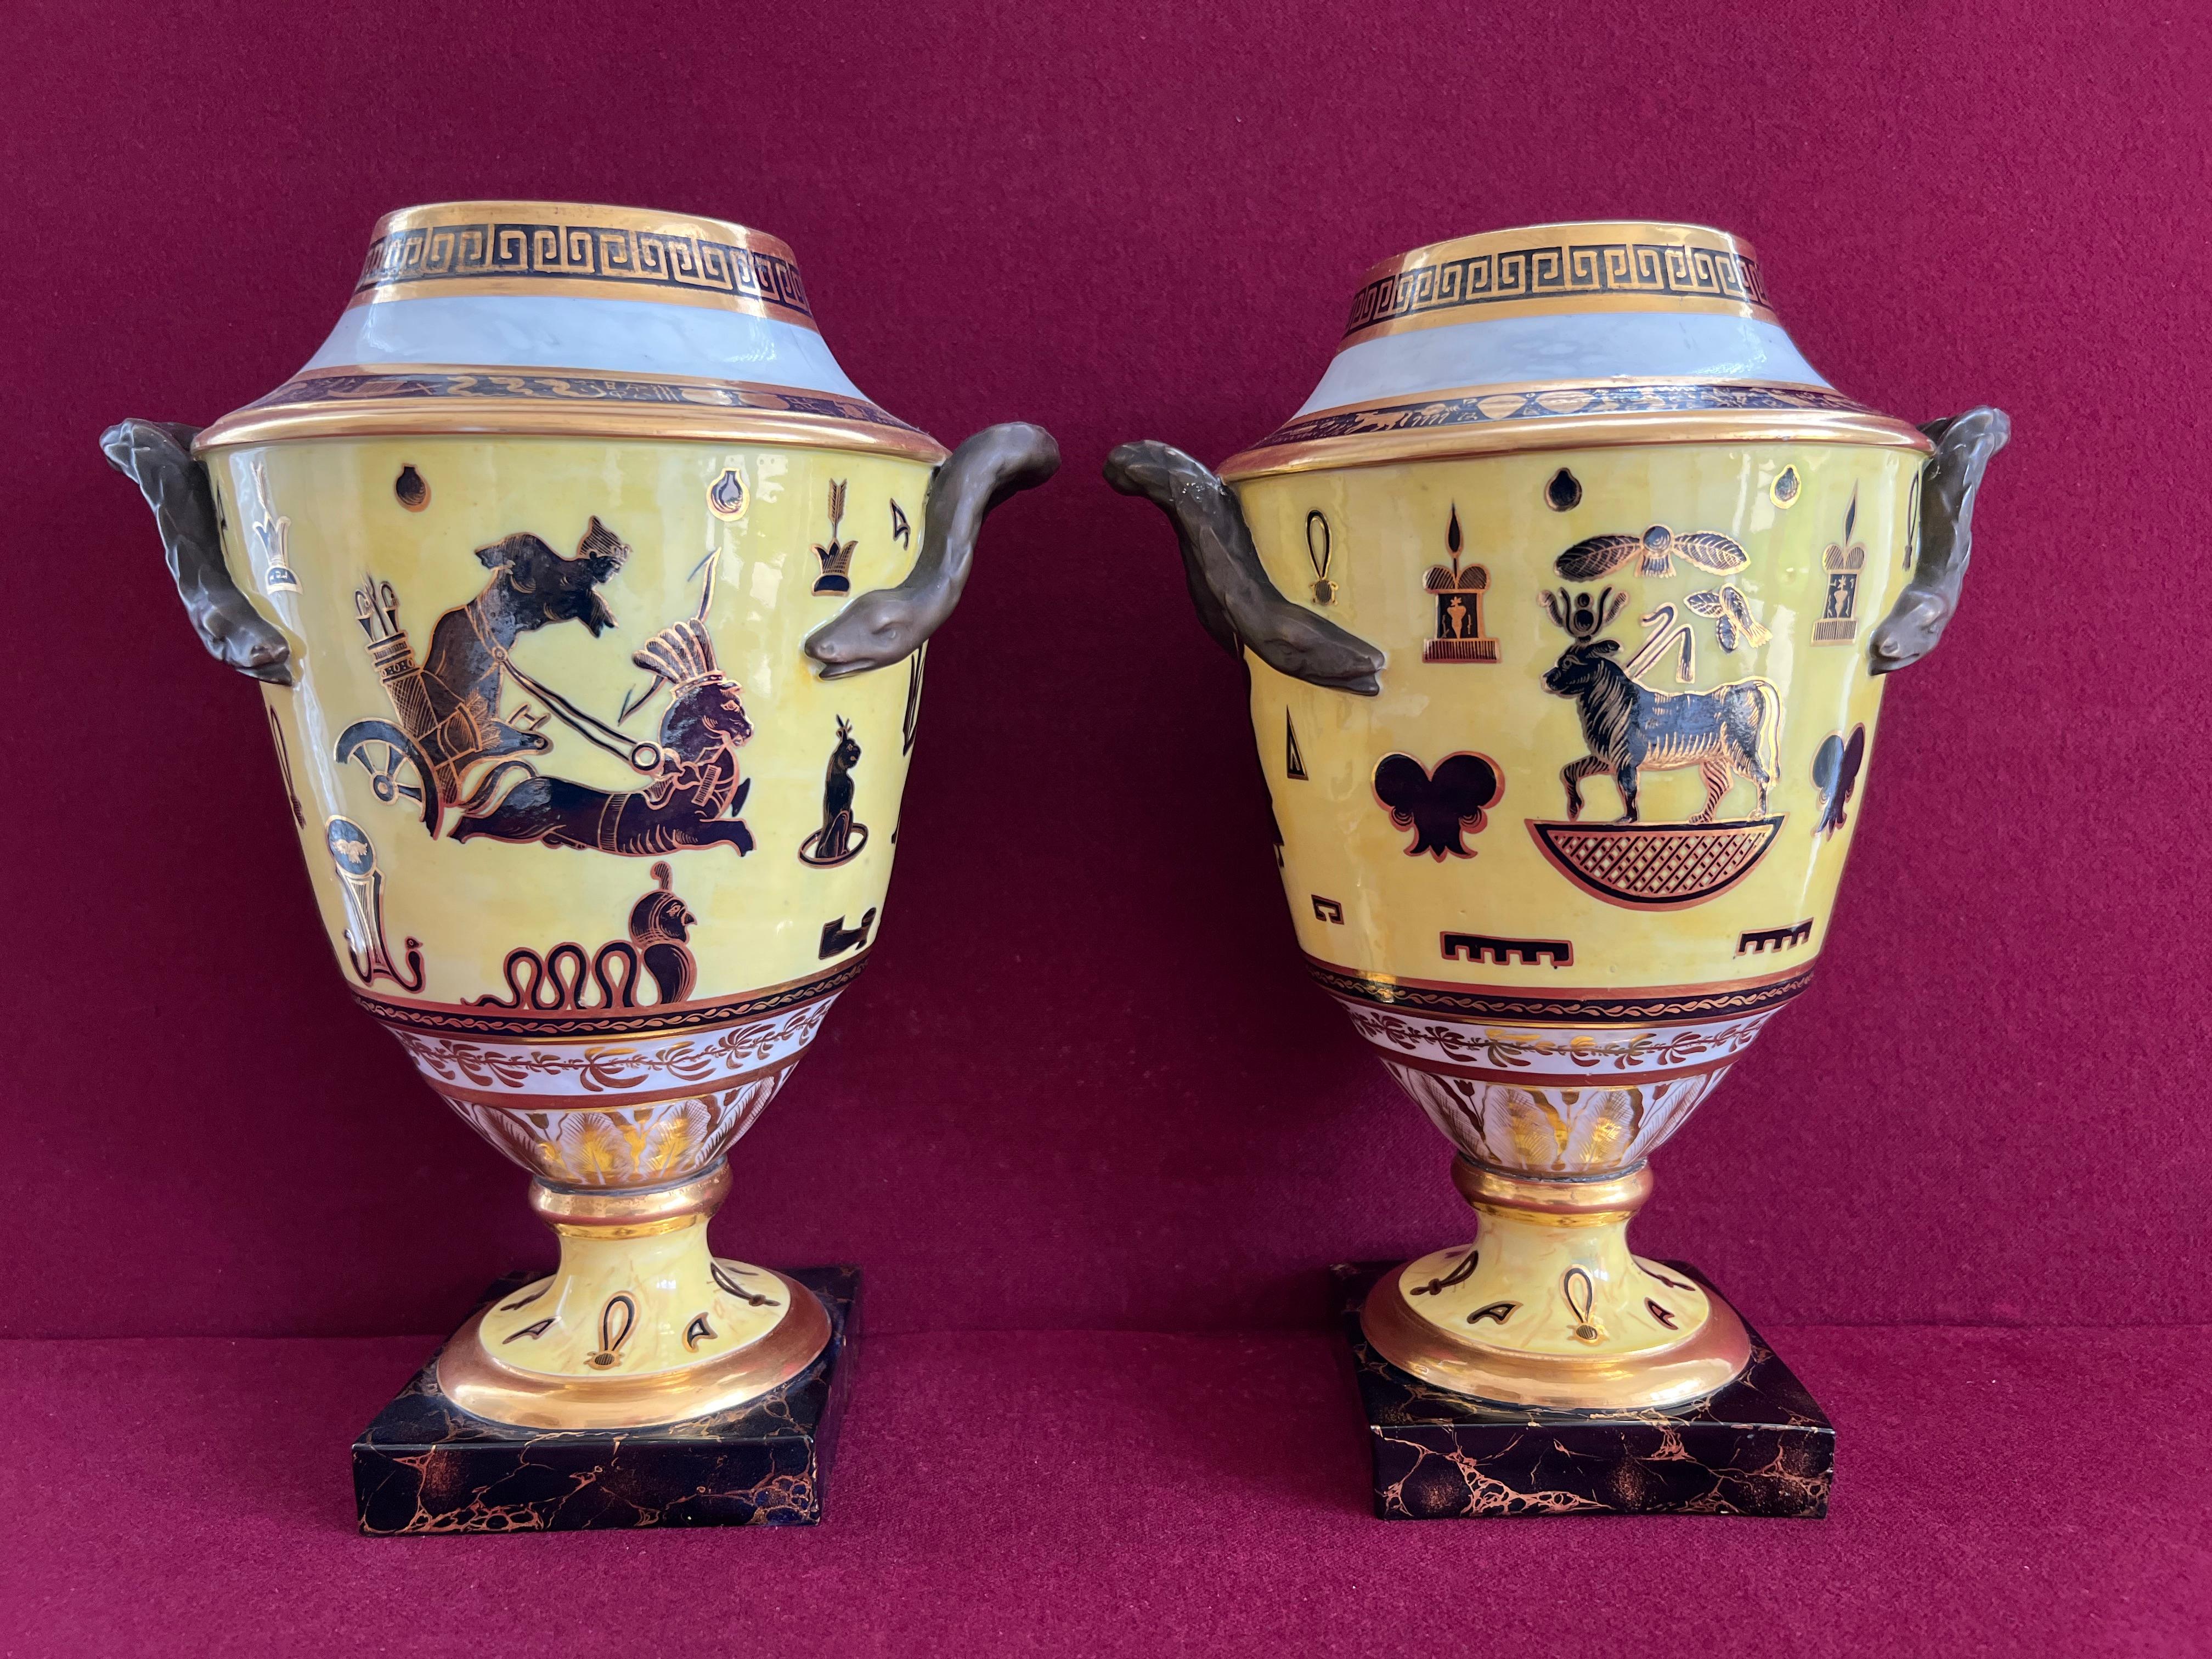 A rare pair of Derby porcelain Duesbury & Kean period yellow ground Egyptian revival vases c.1805-1810. Of tapering form with serpent handles, painted in black and gilt with Egyptian motifs, the shoulder with imitation hieroglyphs below a marbled